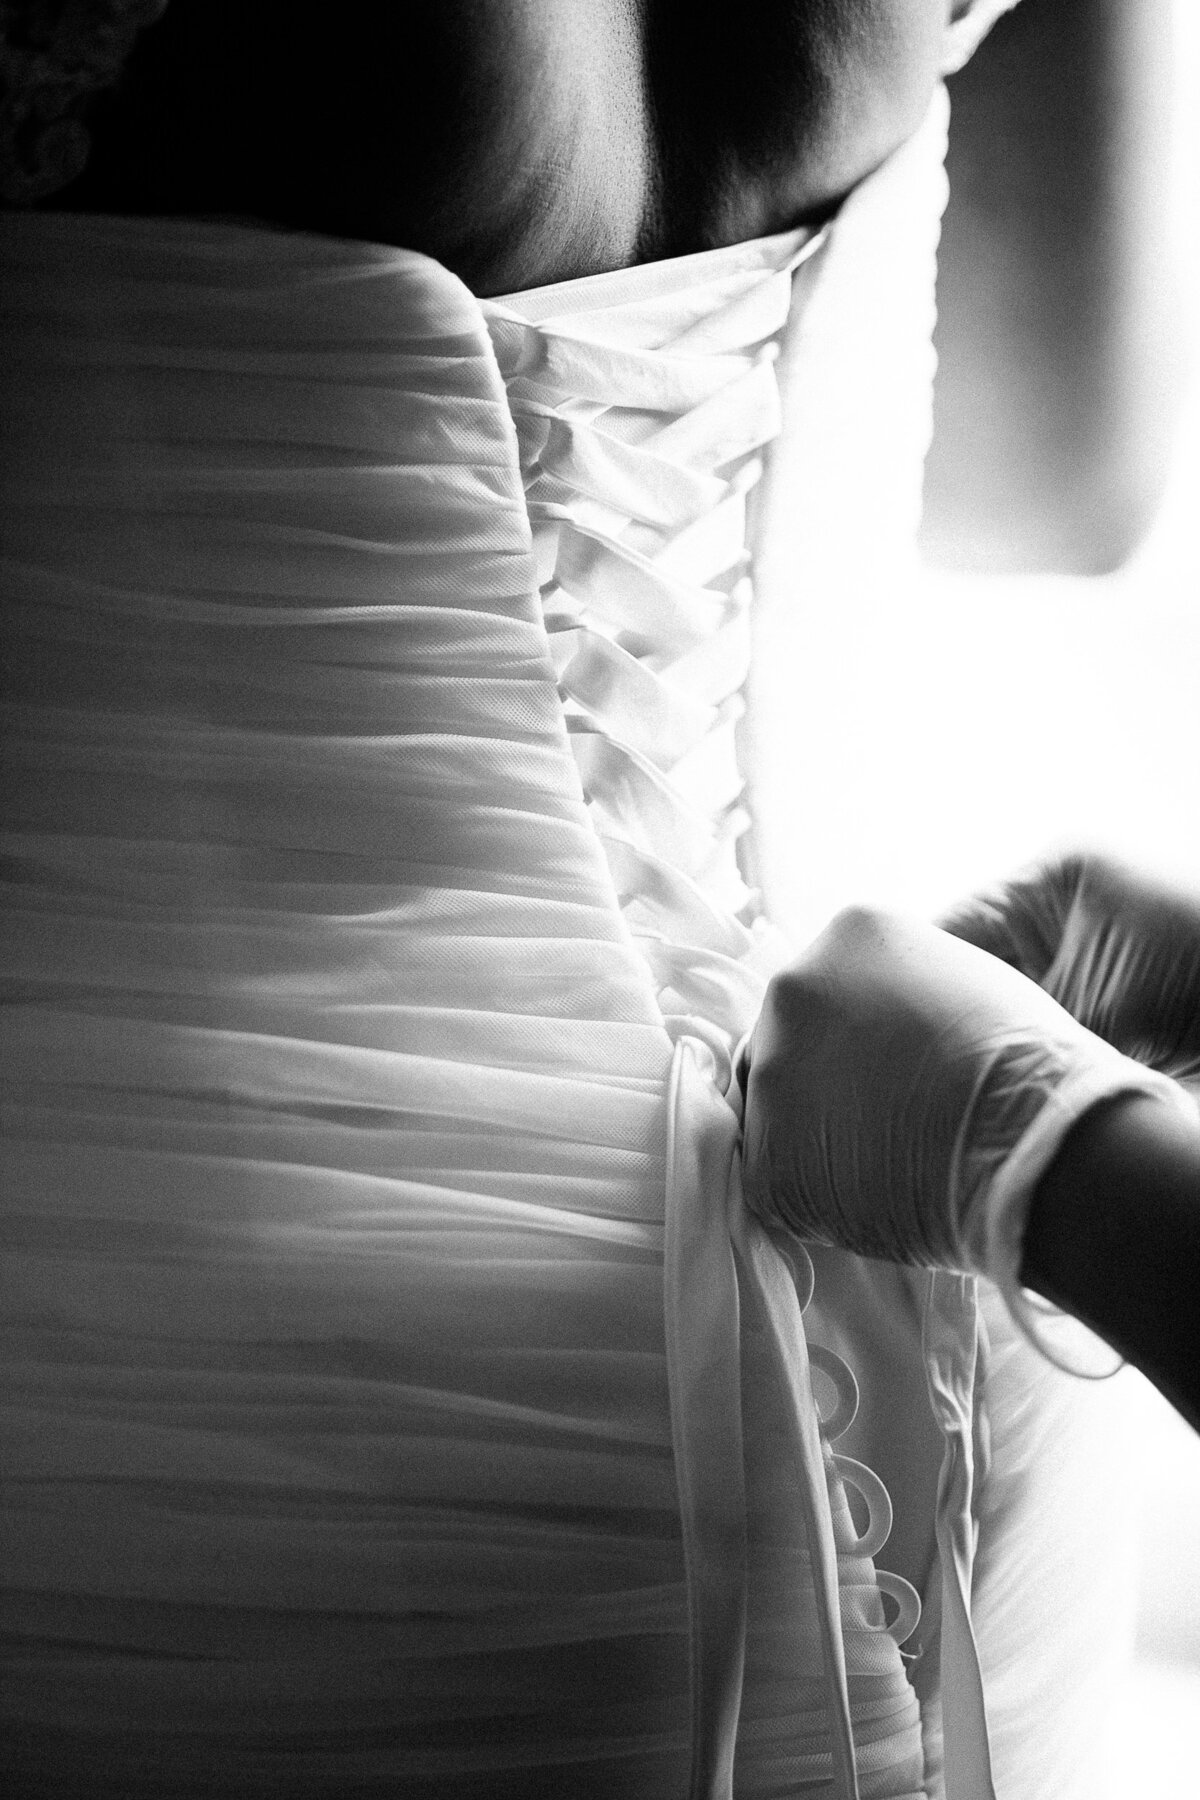 A bridesmaids wears gloves while lacing up the back of the wedding dress, so she doesn’t make any marks on the white material.